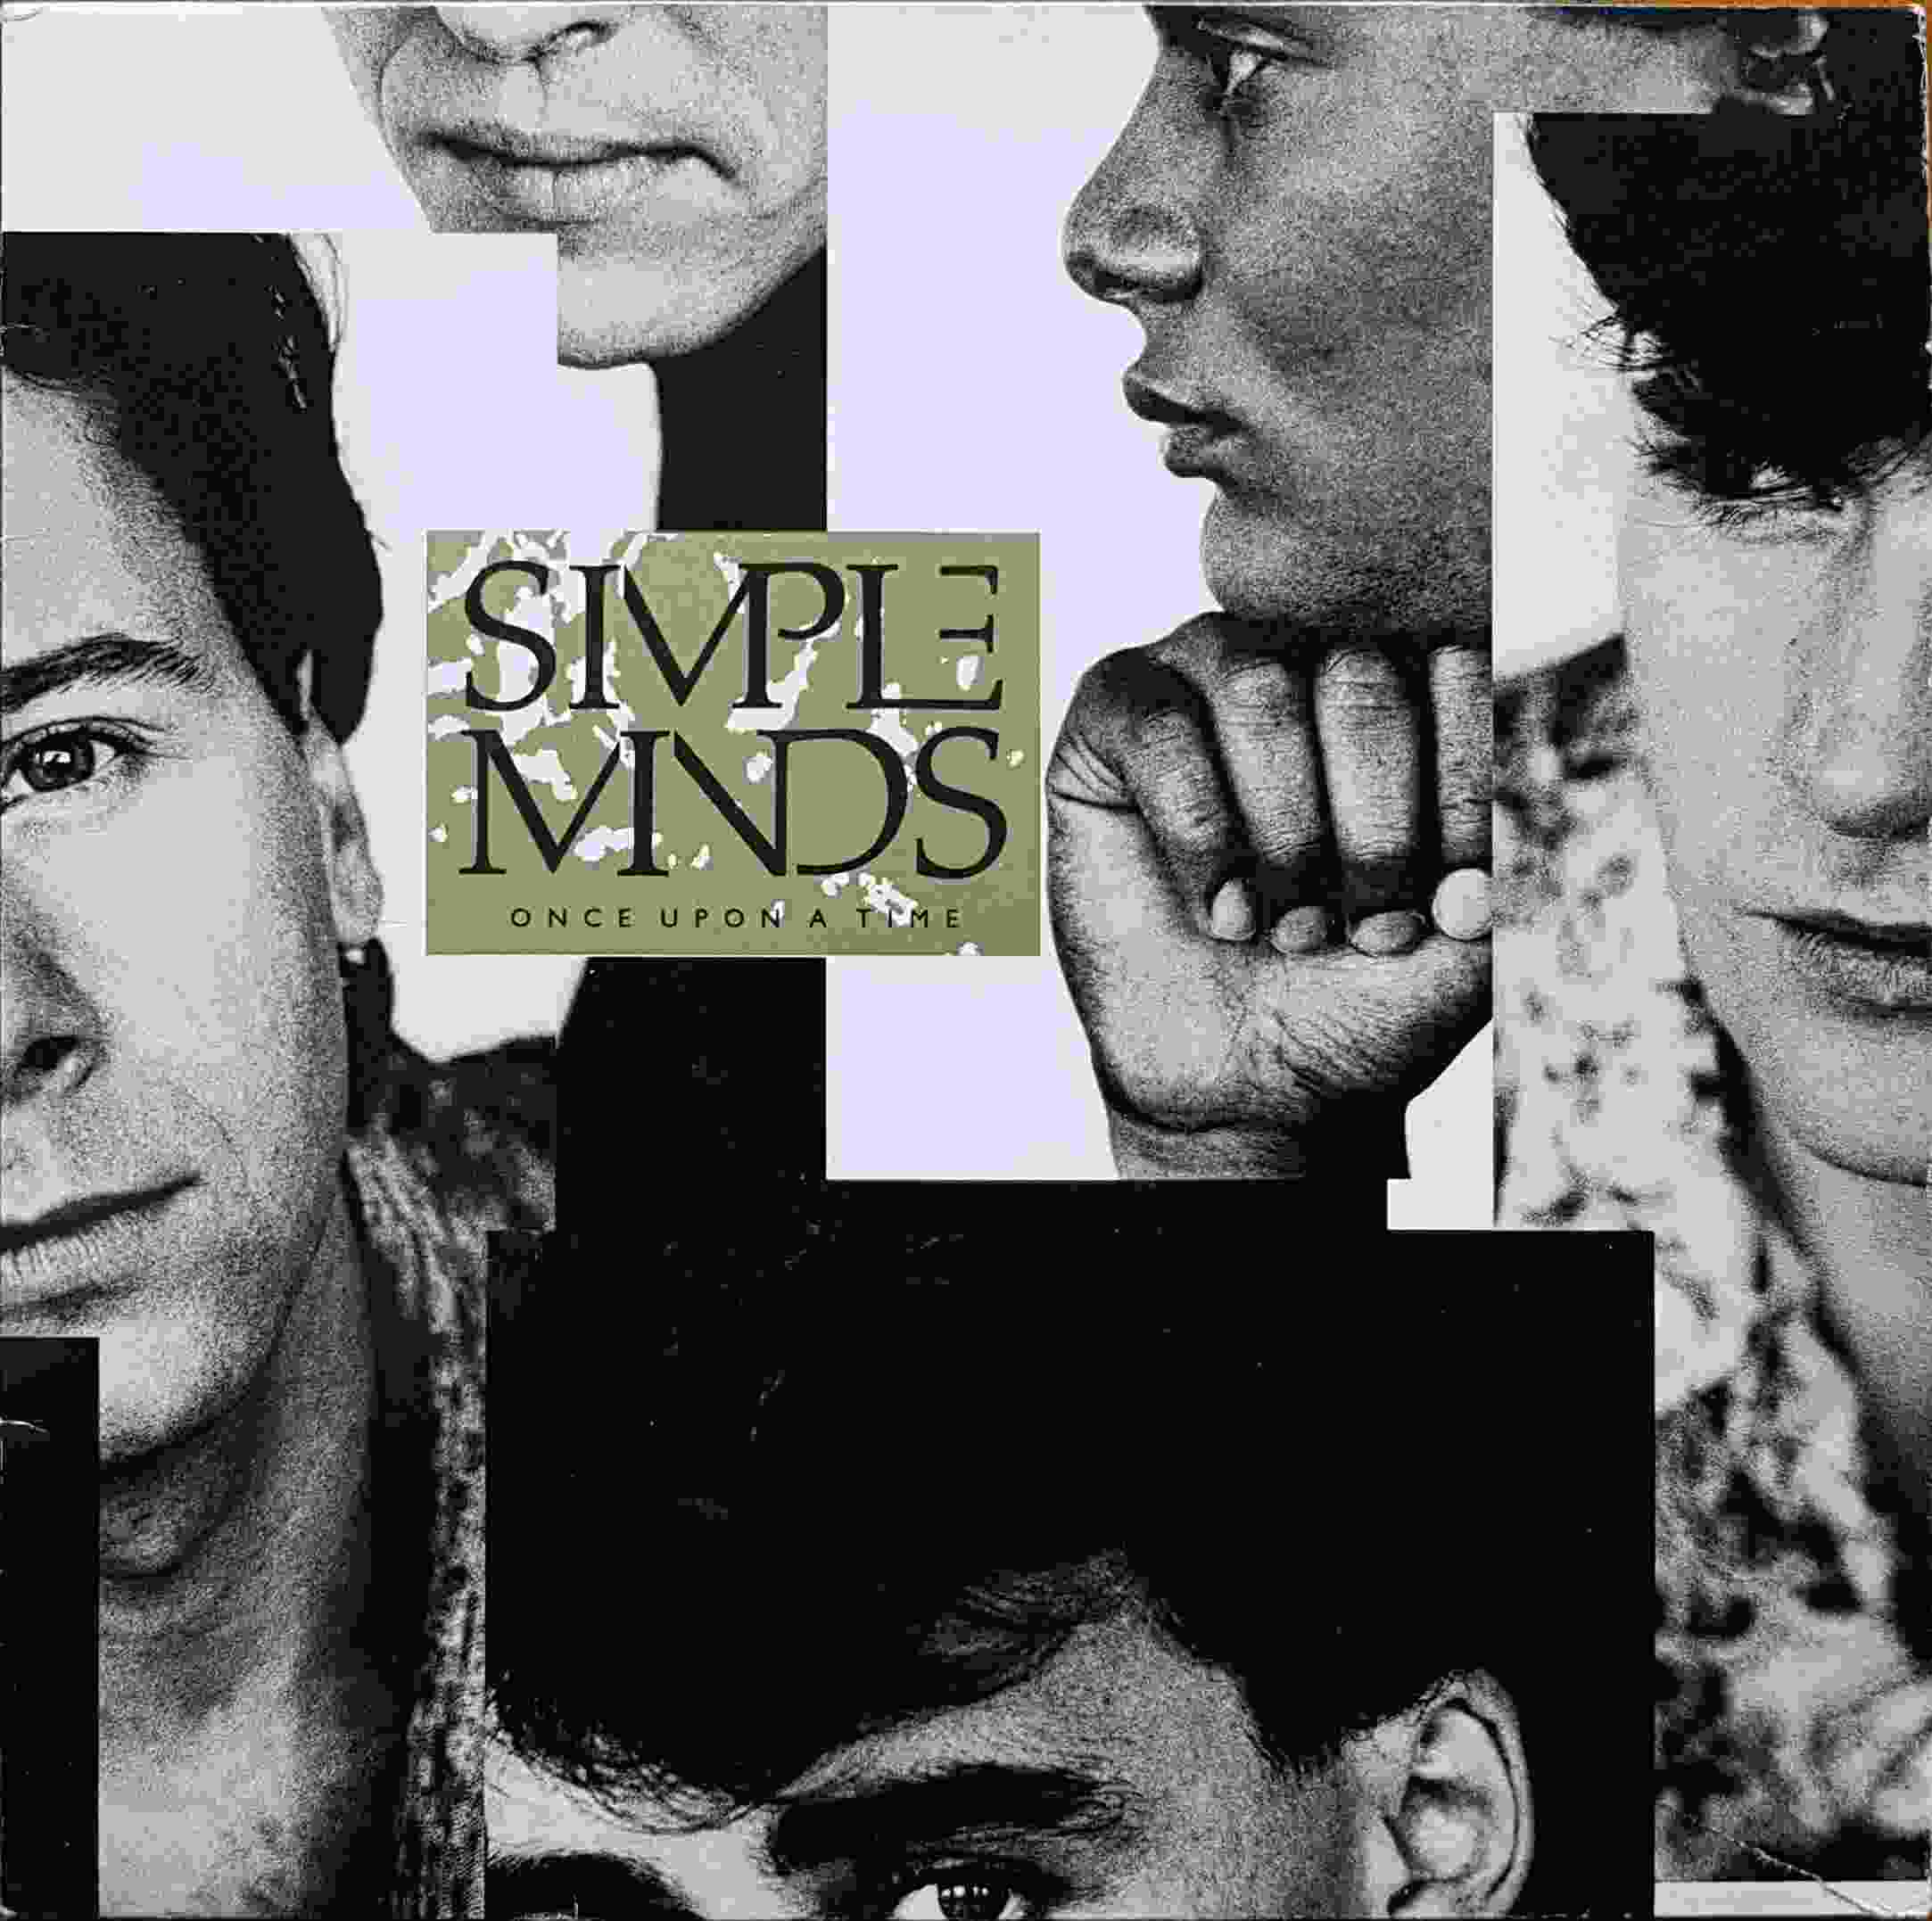 Picture of Once upon a time by artist Simple Minds 